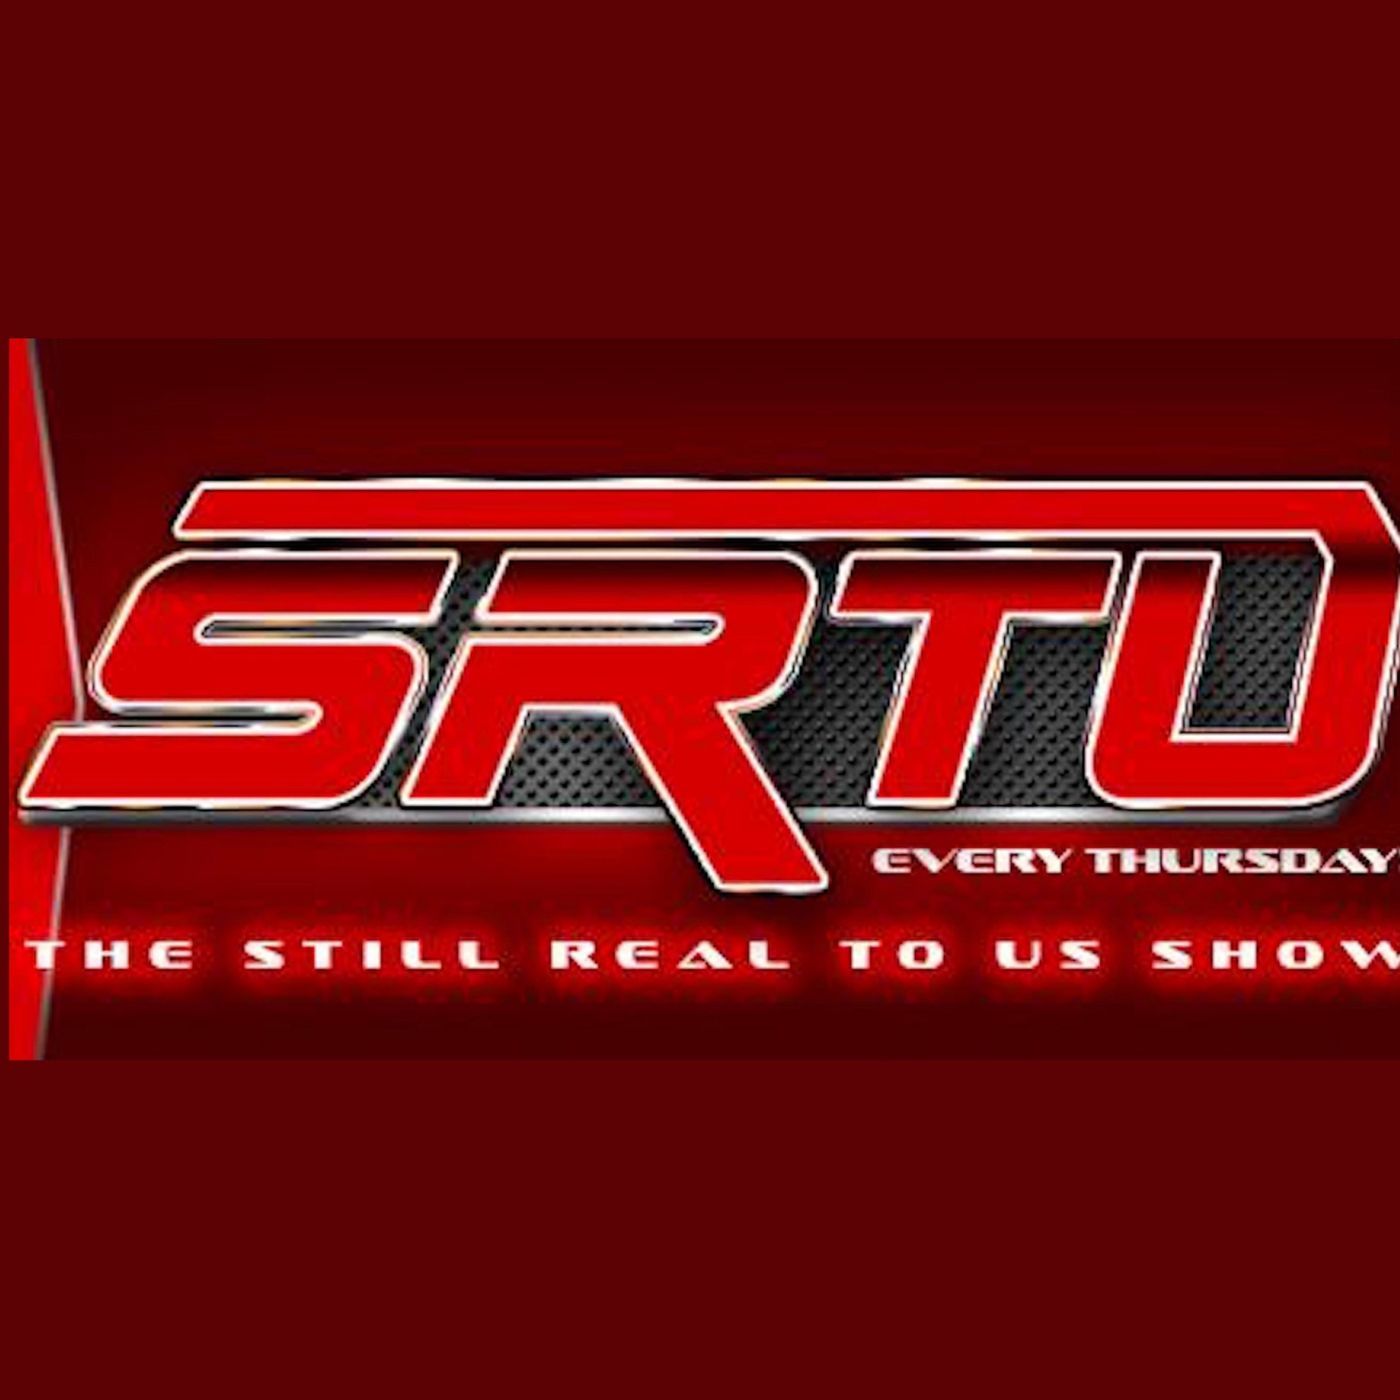 The Still Real to Us Show: Episode #588 – 5/20/21